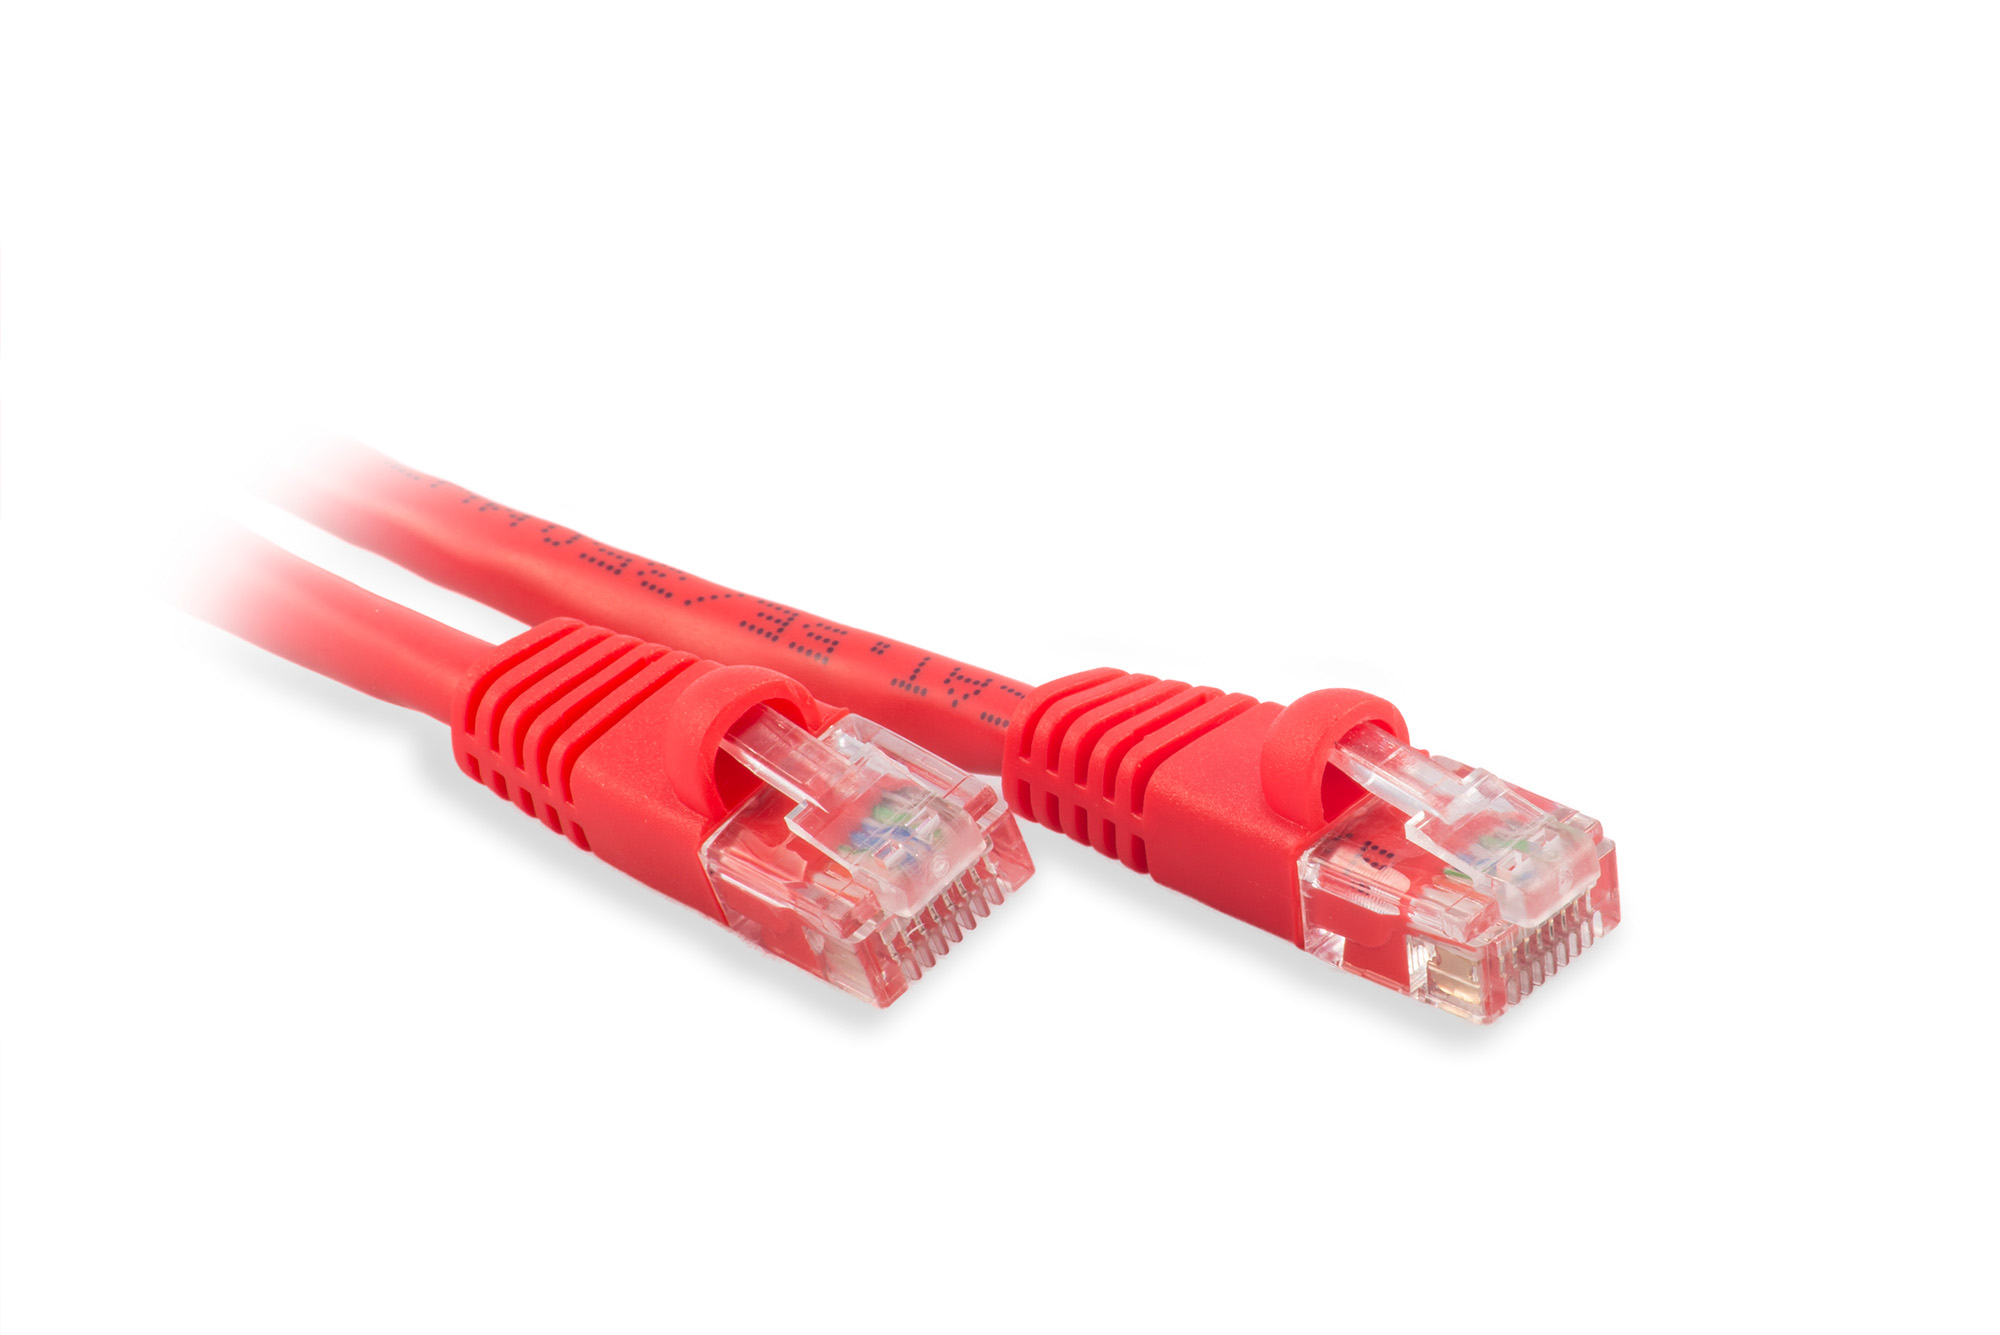 14ft Cat5e Ethernet Patch Cable - Red Color - Snagless Boot, Stranded, RJ45, 350Mhz, 24AWG